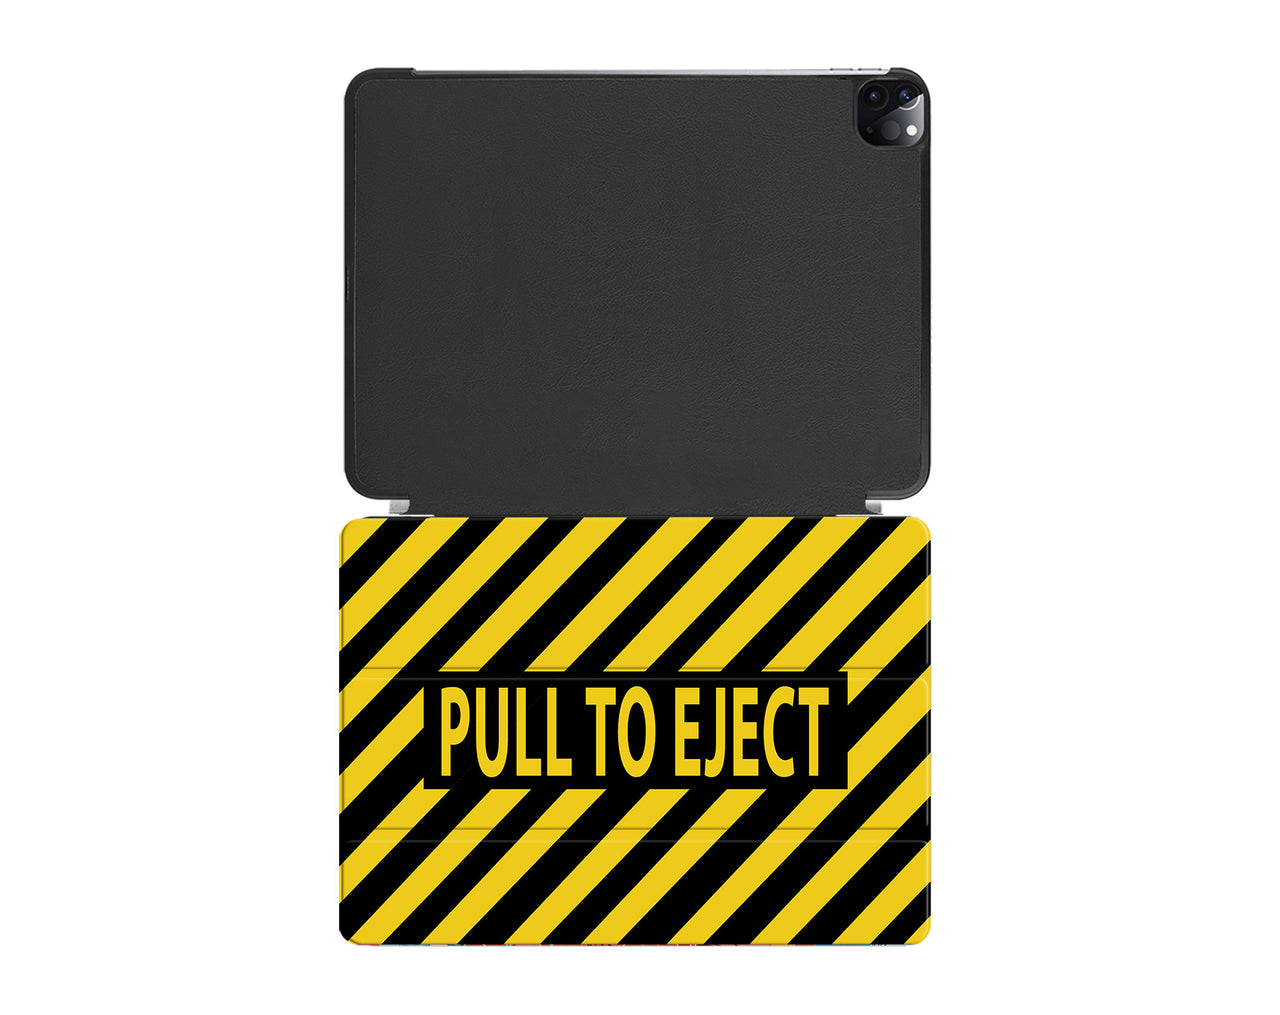 Pull to Eject Designed iPad Cases